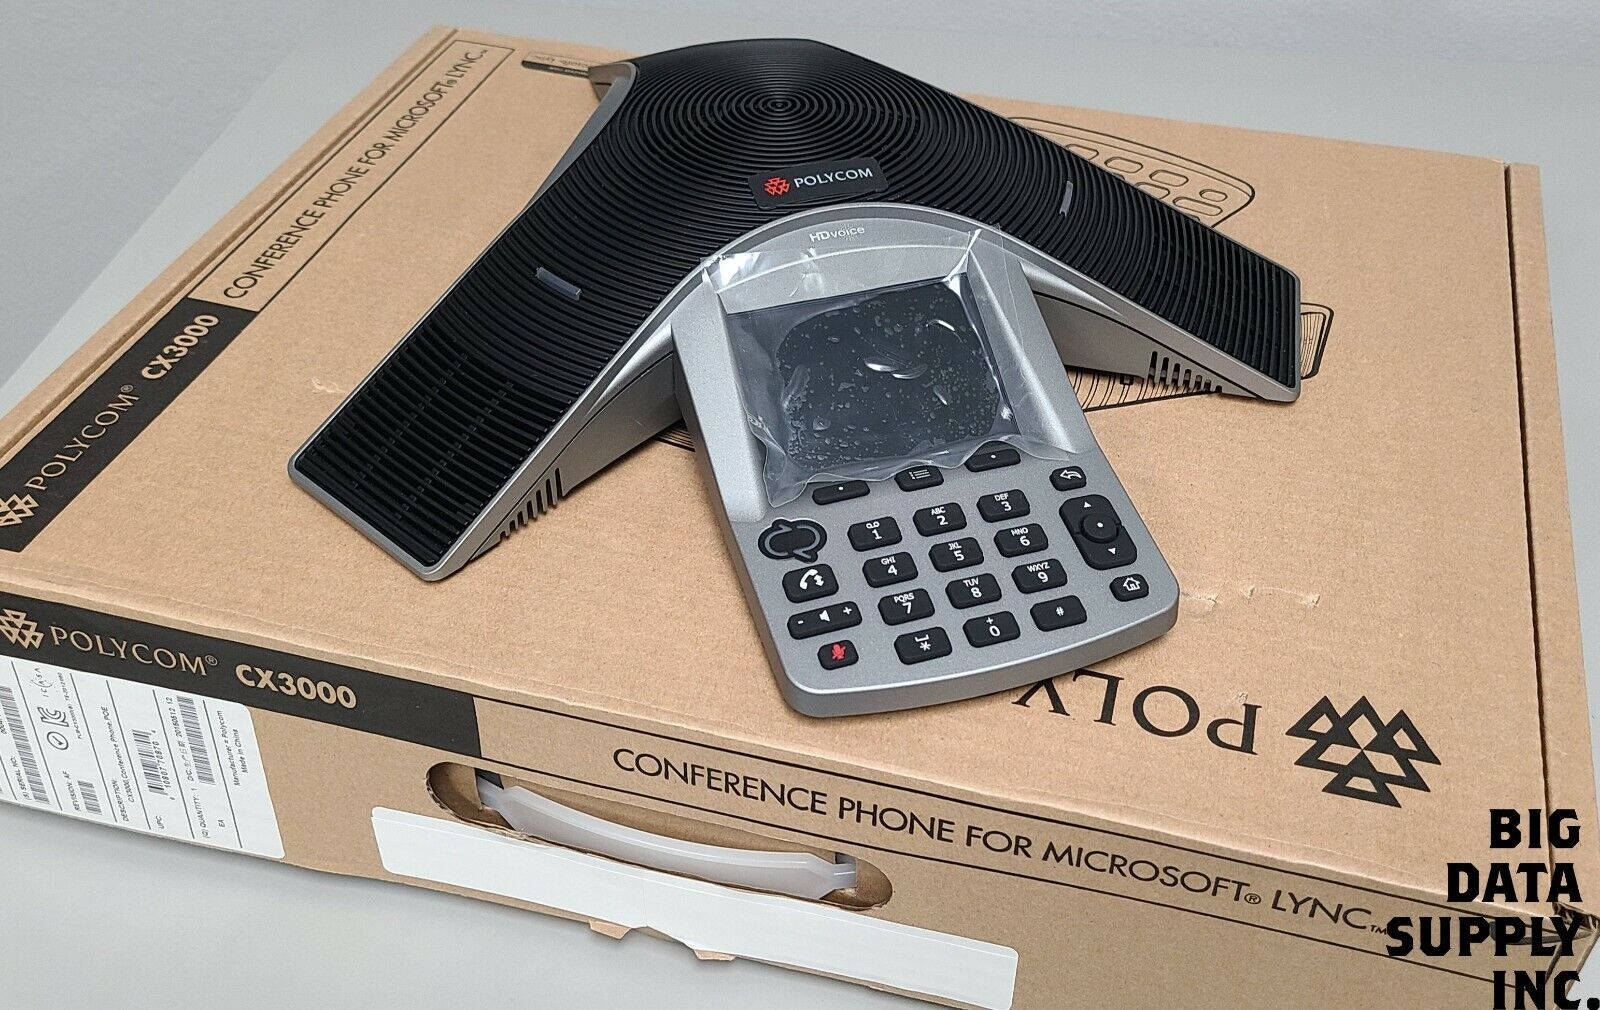 NEW - Polycom, CX3000 IP Conference Phone, P/N 2201-15810-001